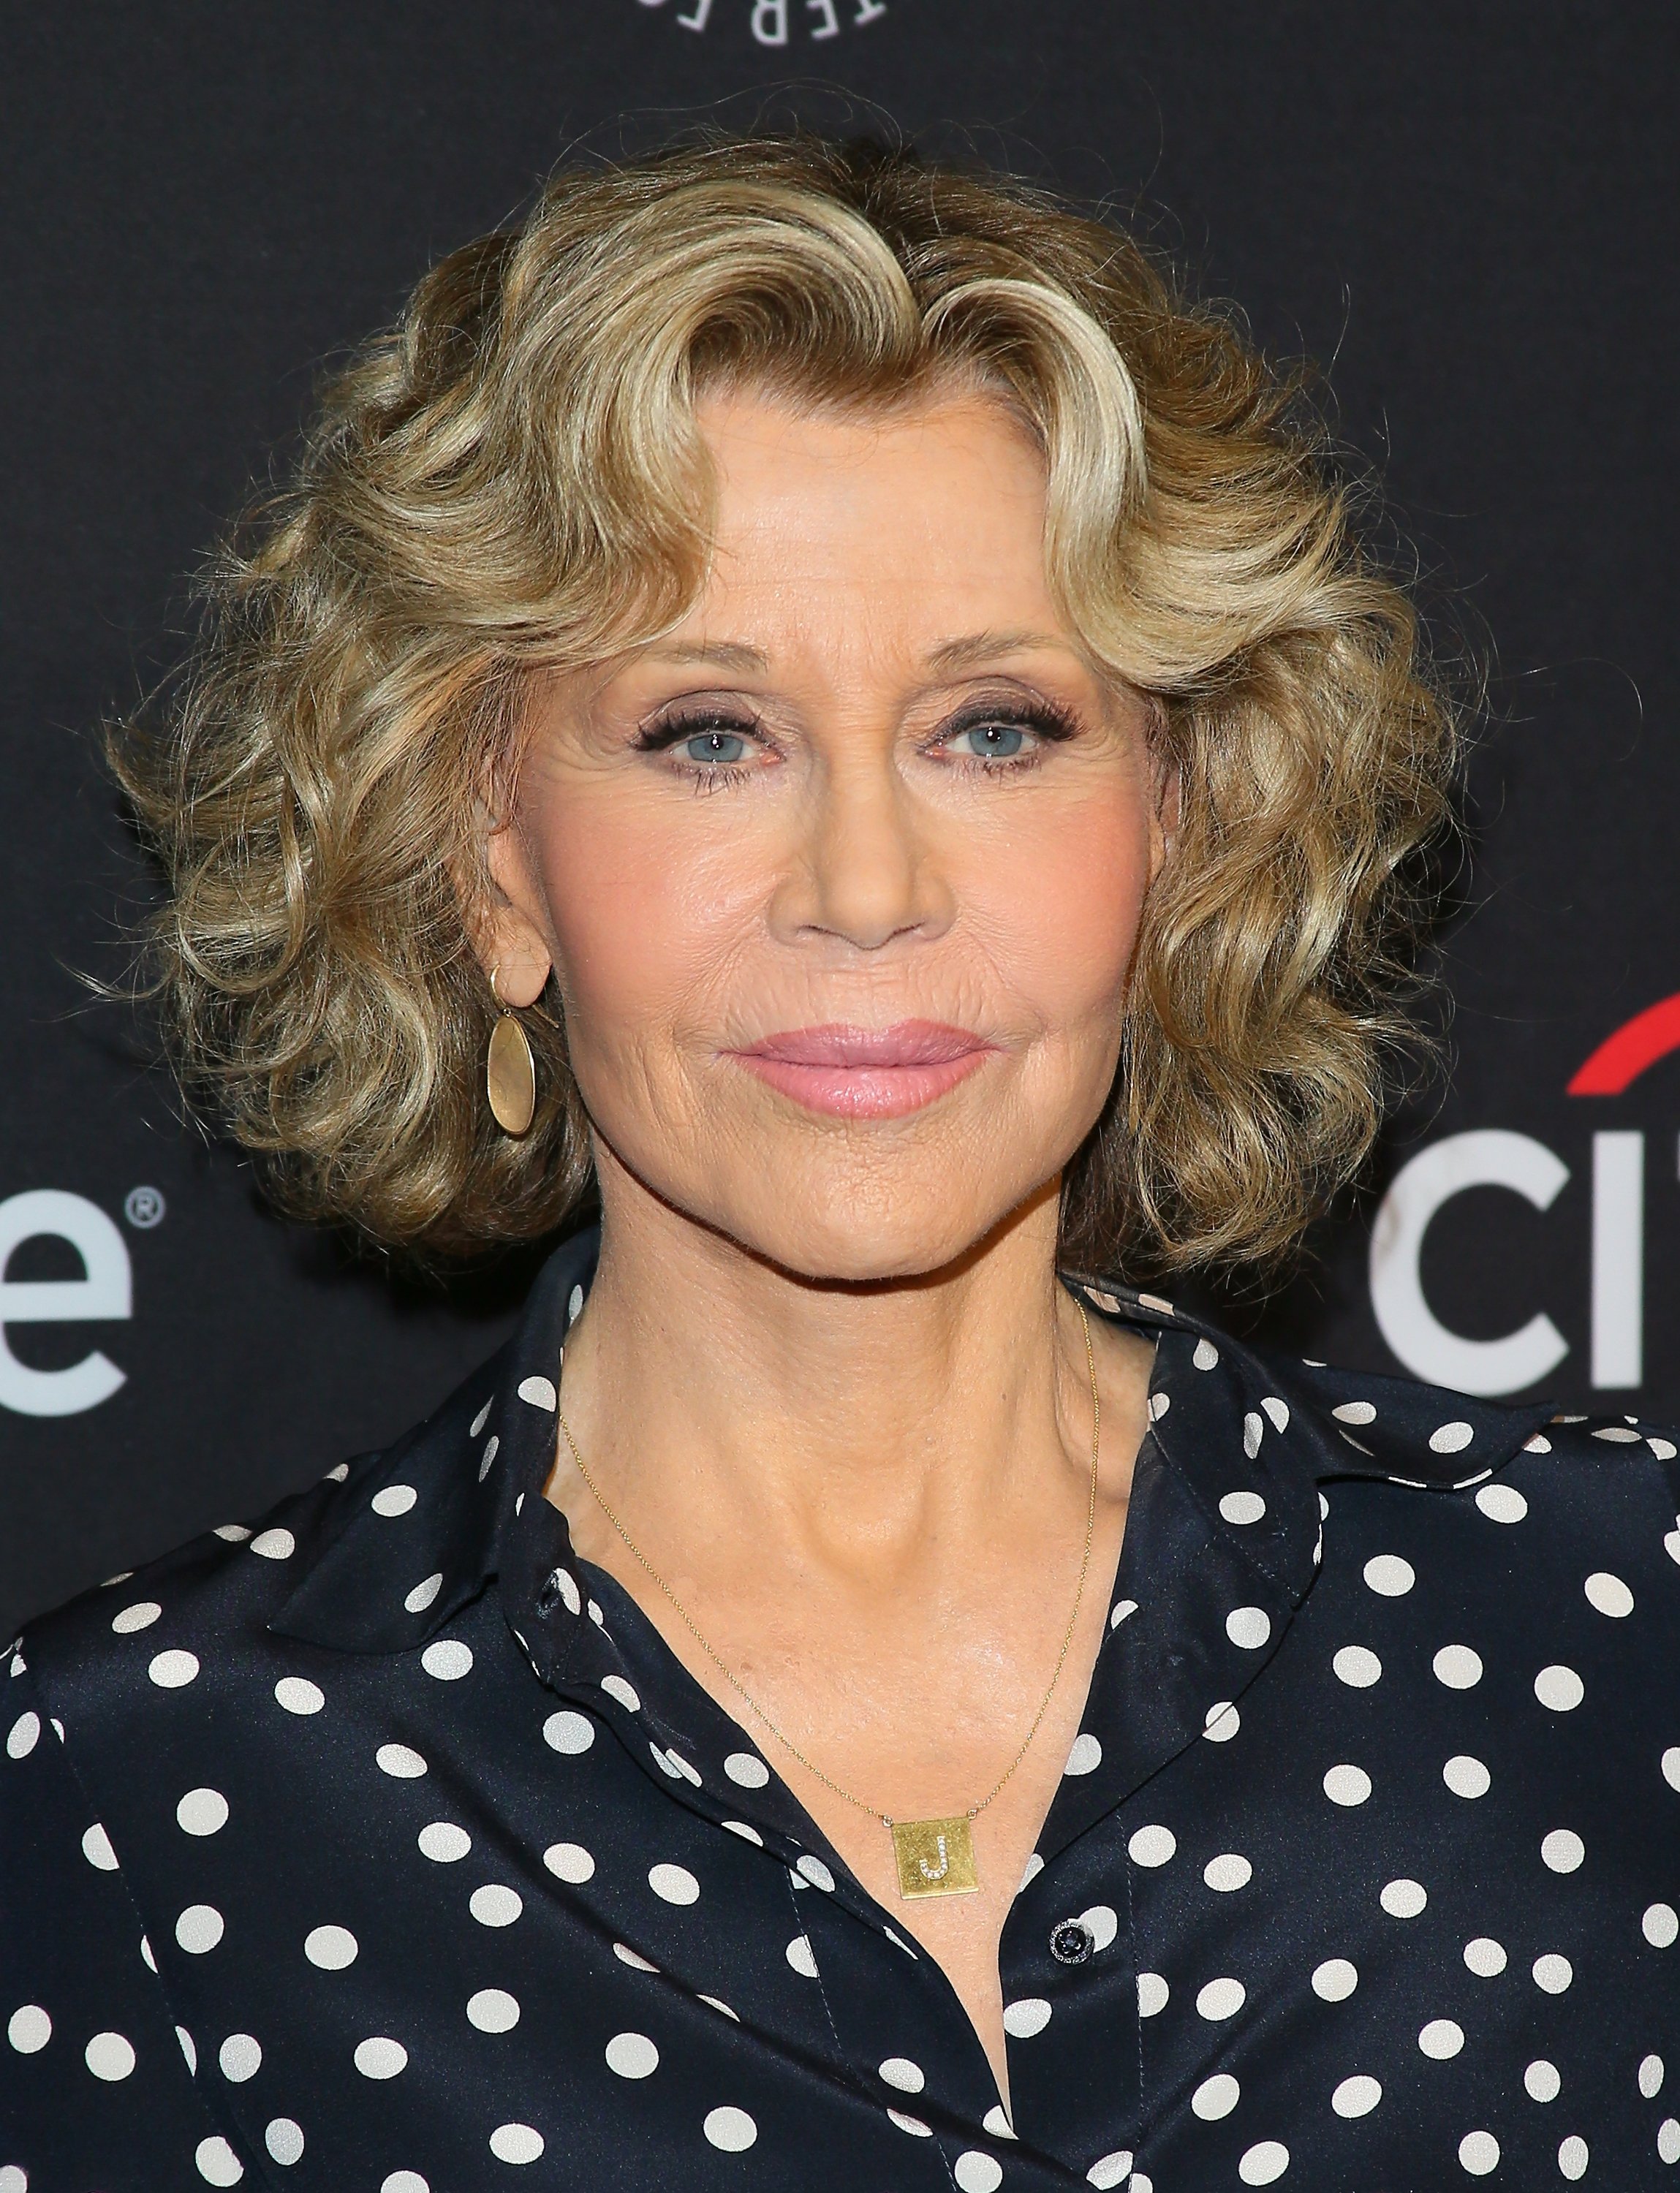 Jane Fonda attends the Paley Center For Media's 2019 PaleyFest LA - "Grace And Frankie" on March 16, 2019, in Los Angeles, California. | Source: Getty Images.